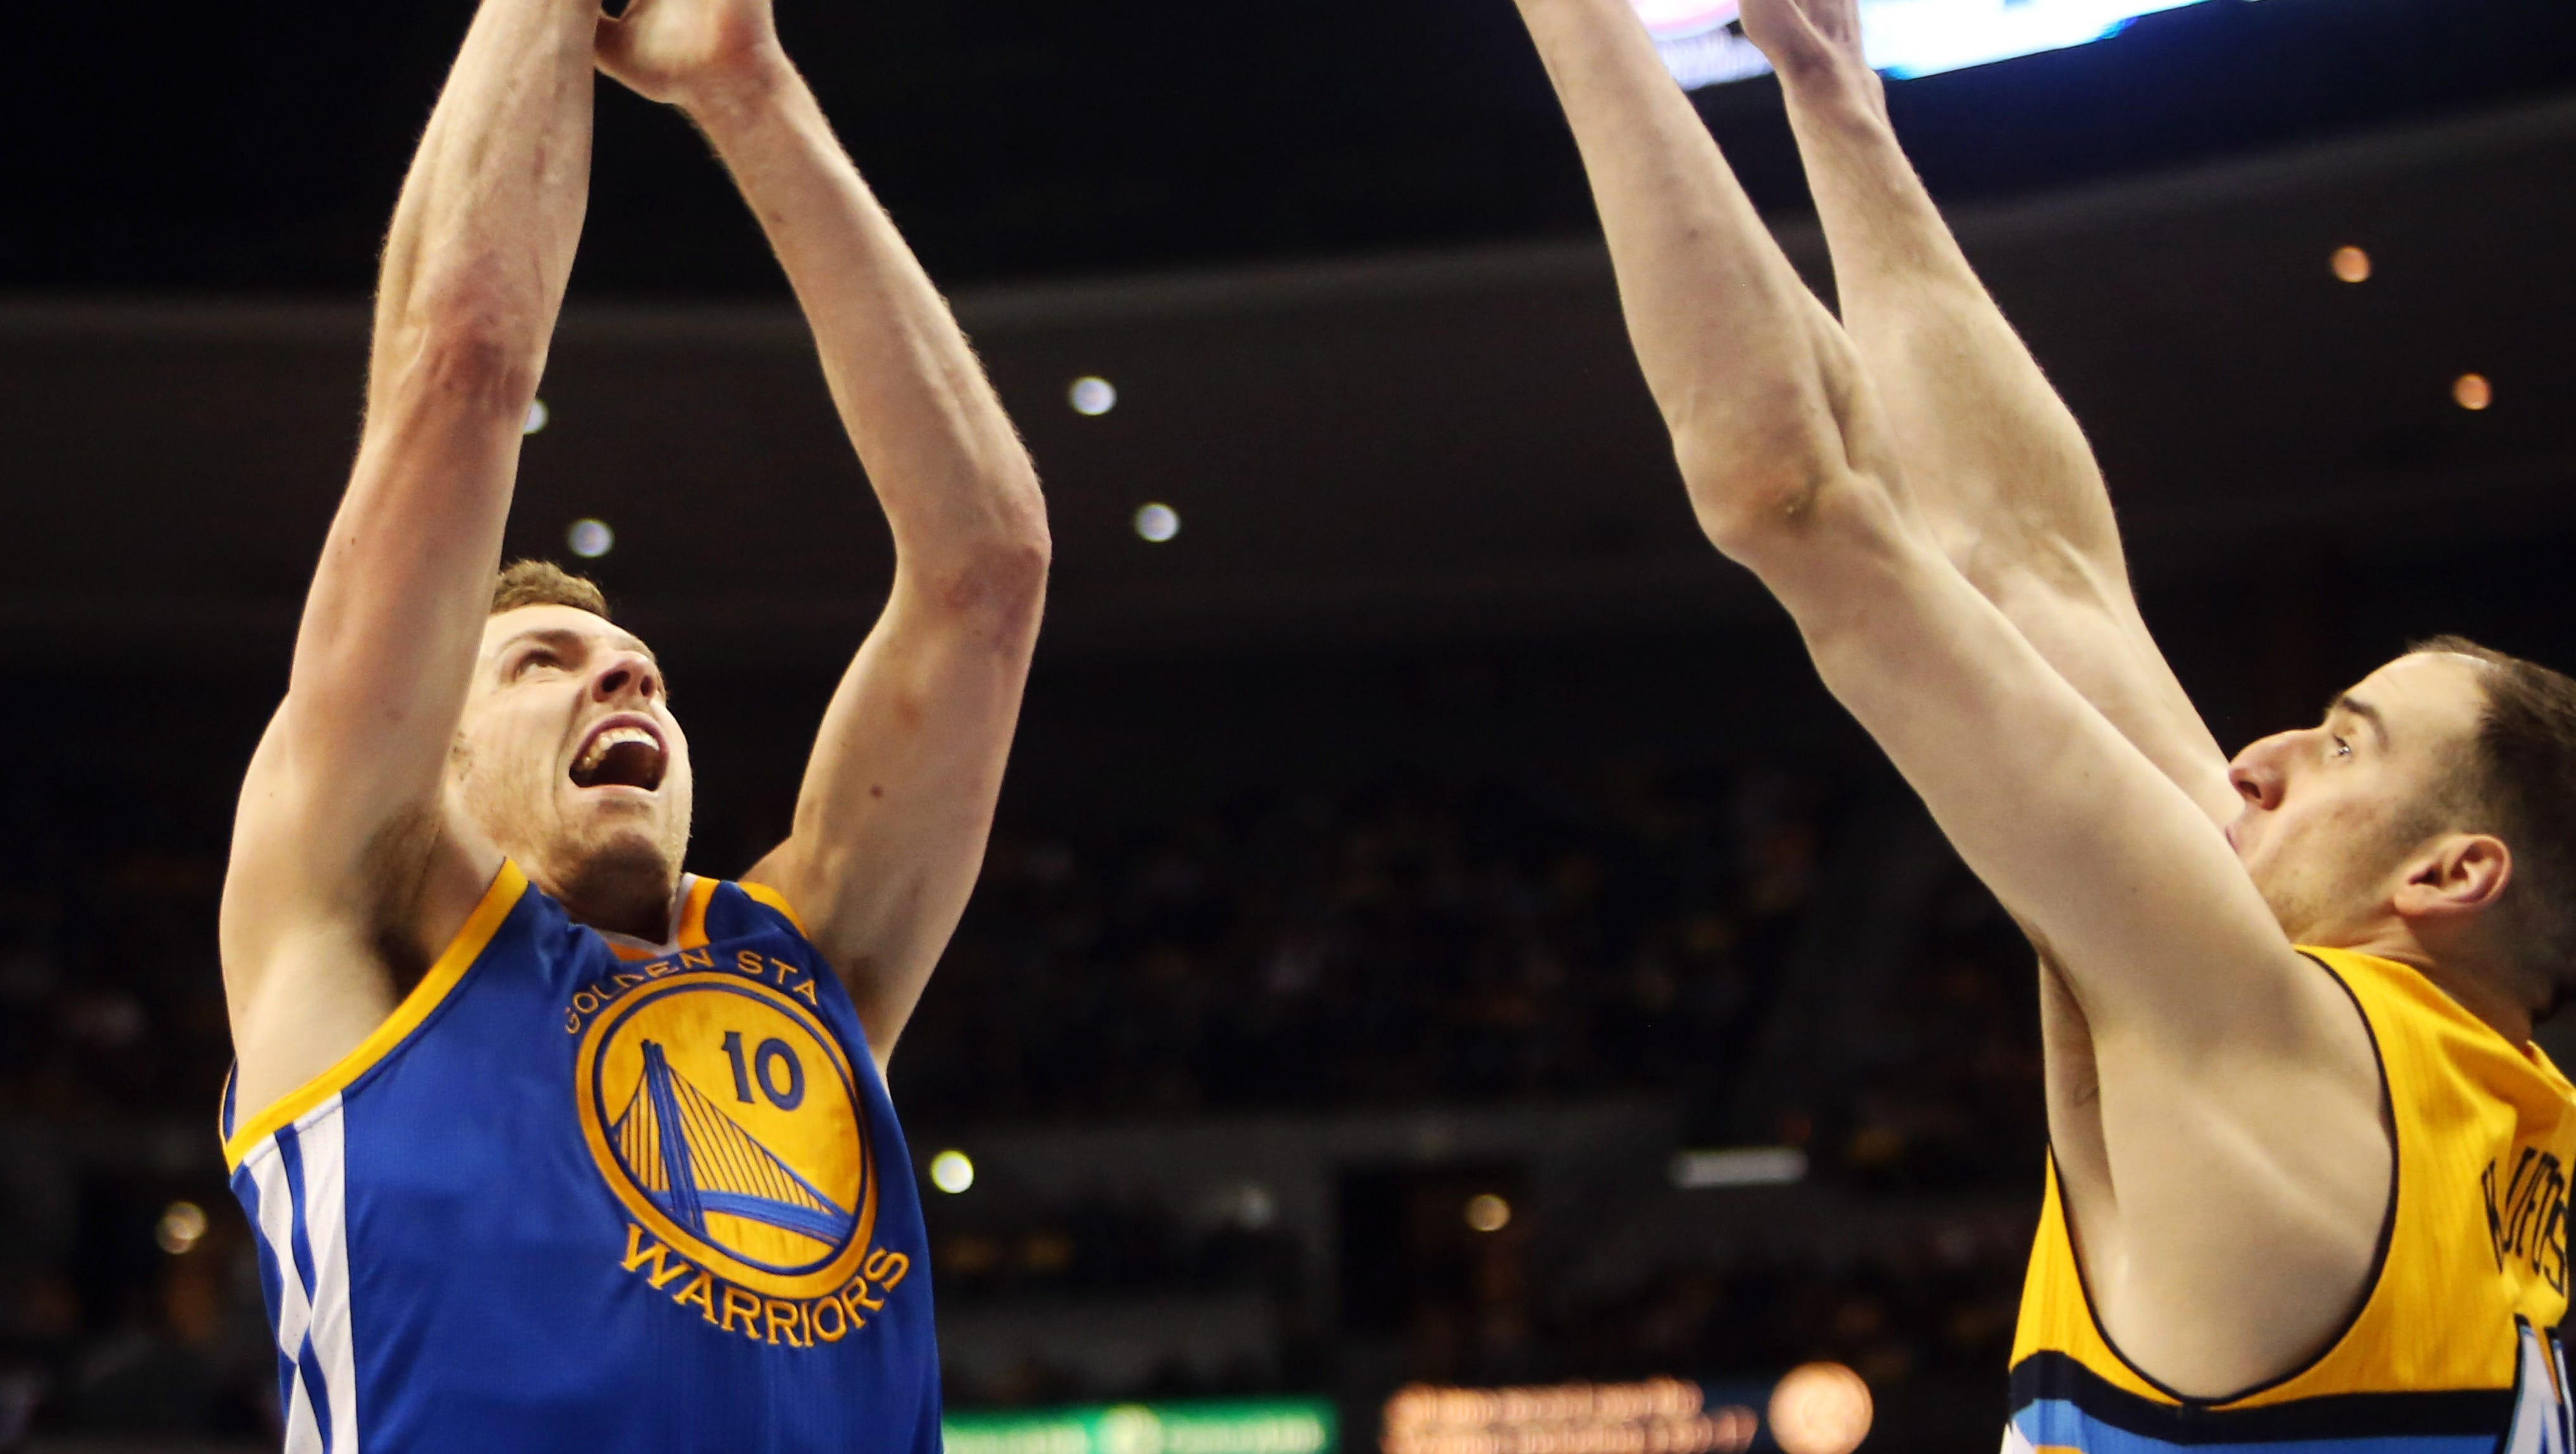 David Lee has hip injury, out for rest of NBA playoffs